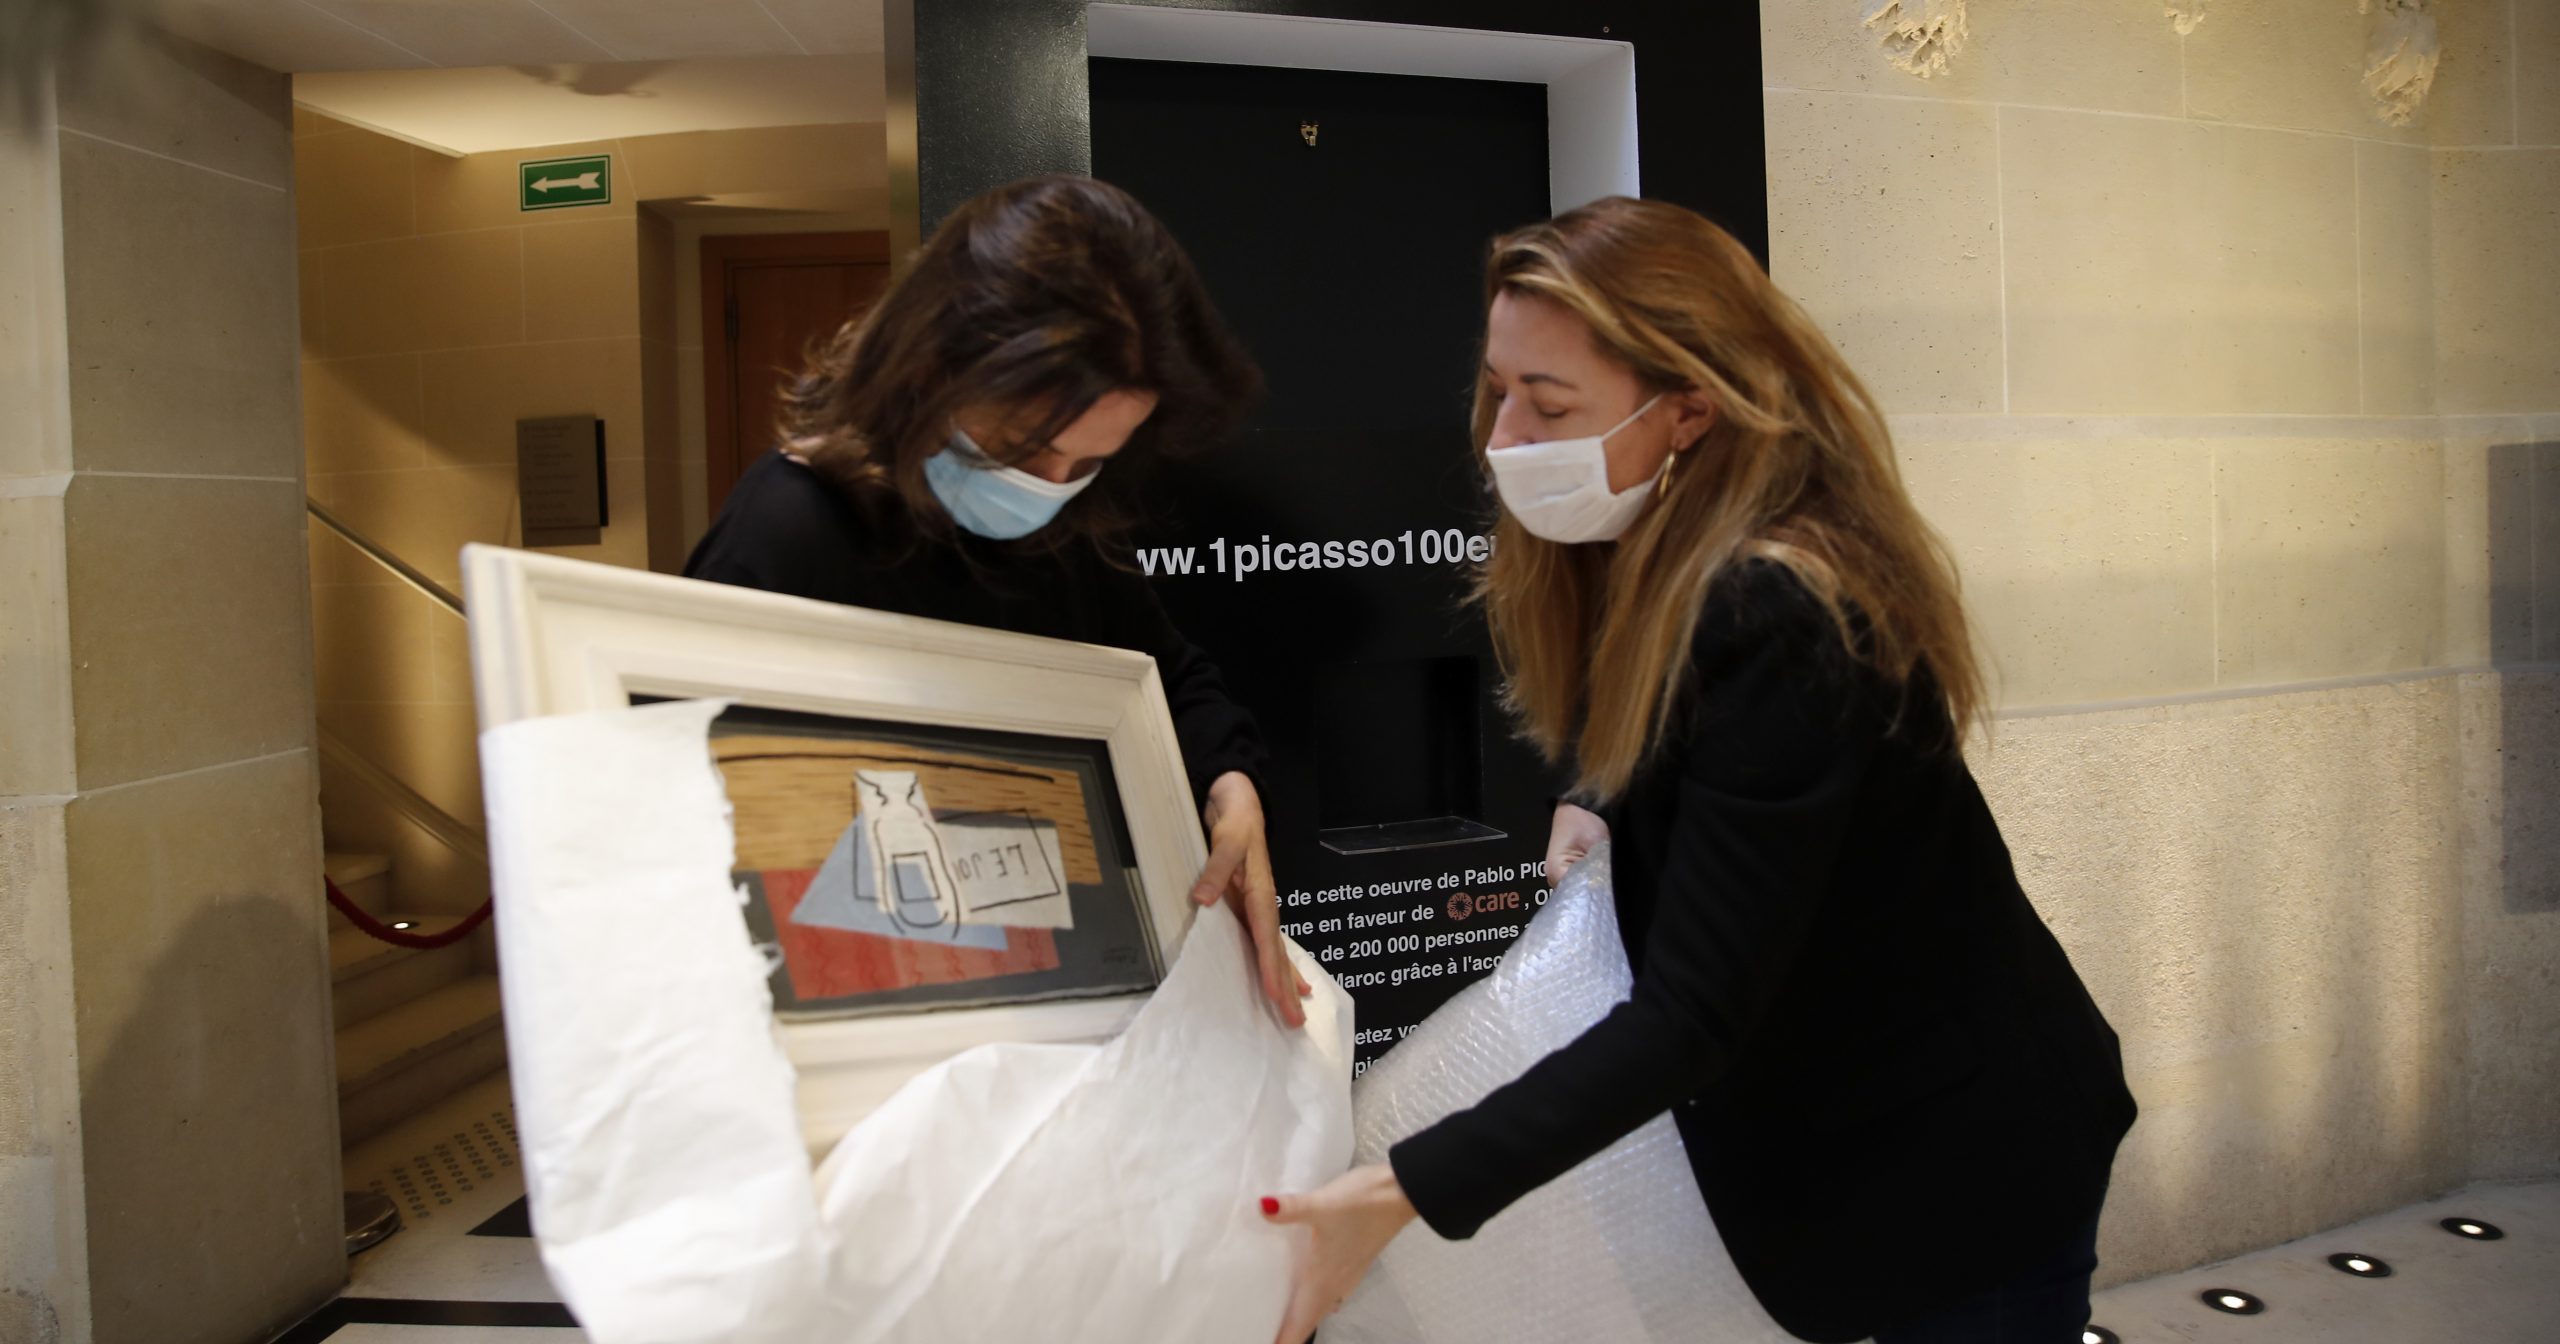 Raffle organizers Peri Cochin, left, and Arabenne Reille unbox the painting "Nature morte" by Picasso at Christie's auction house on May 19, 2020, in Paris.